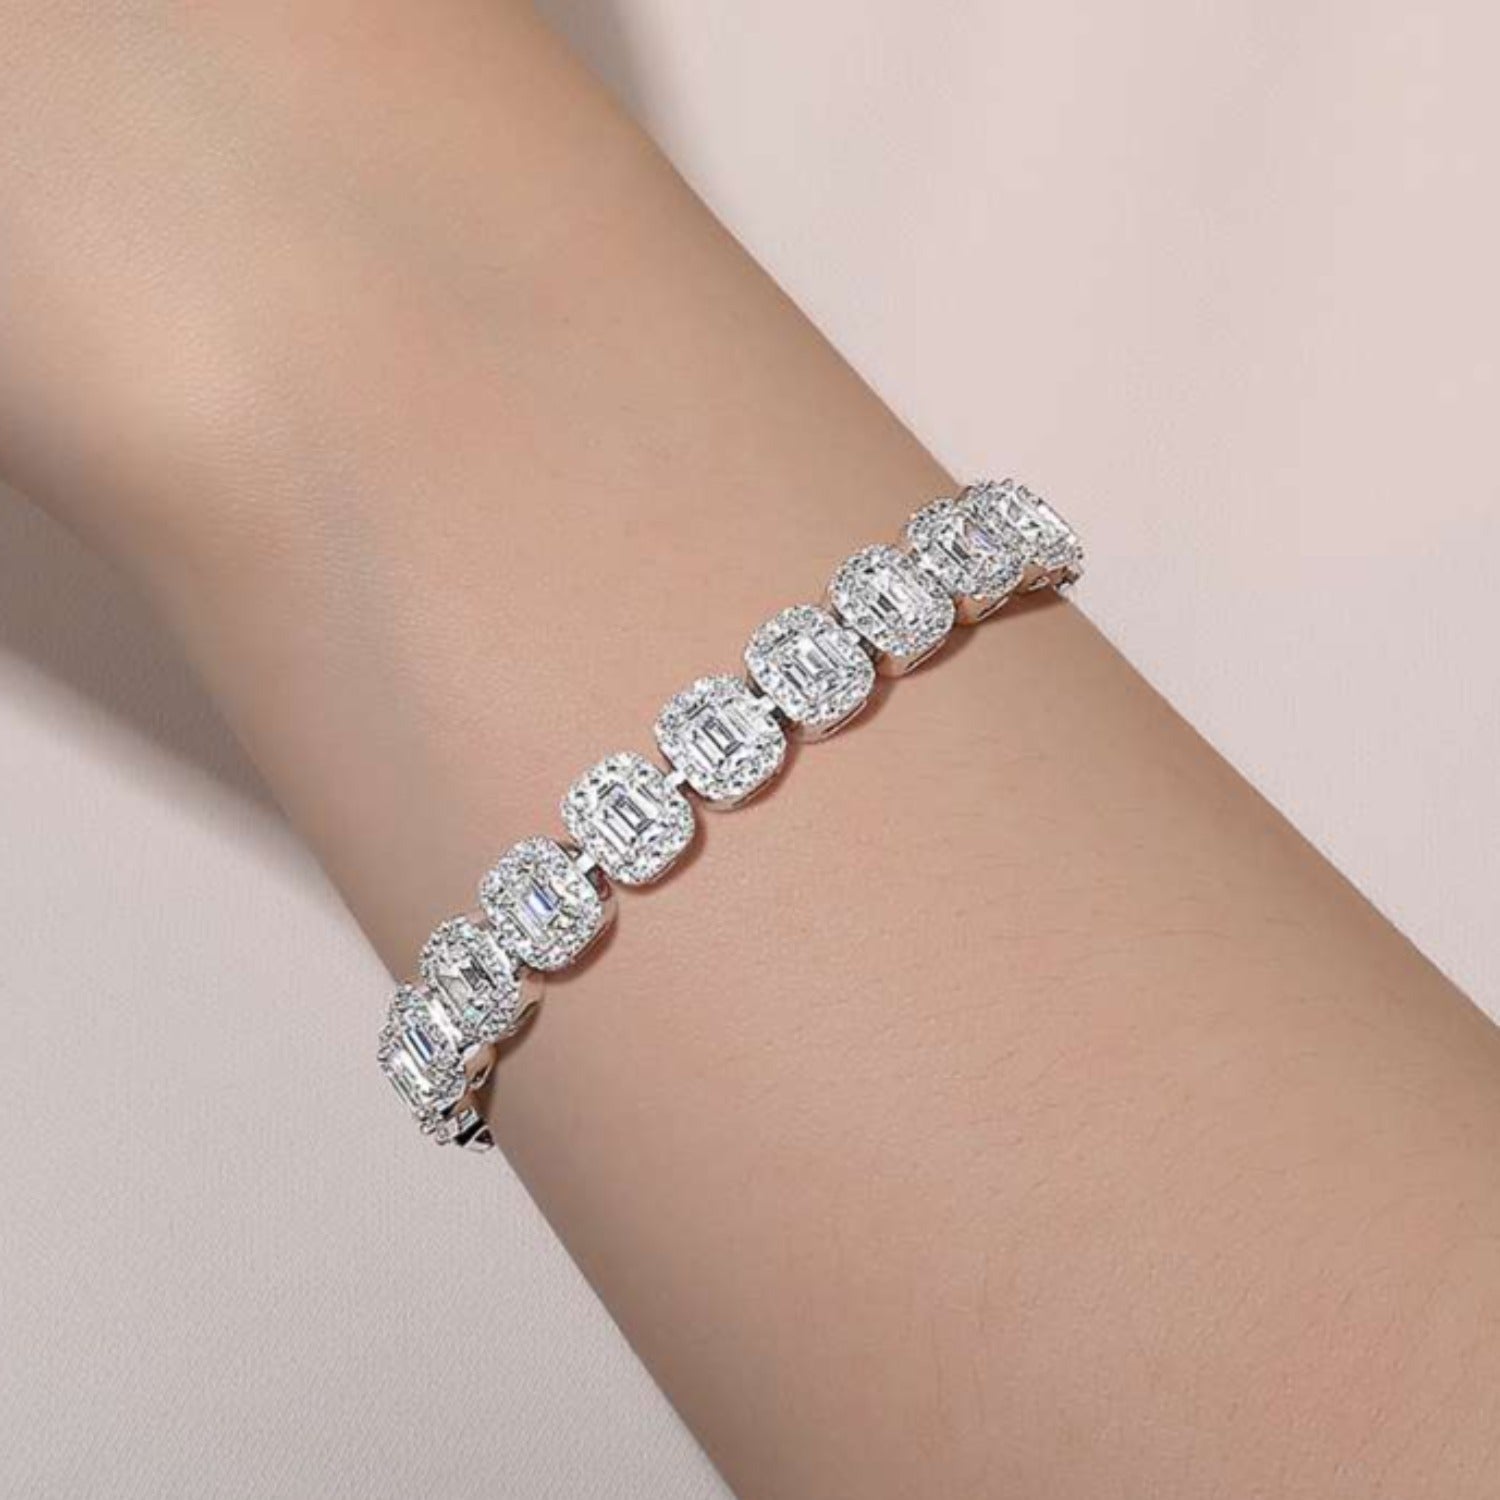 Tennis Bracelet Comparison & Pricing Guide | Connecticut Fashion and  Lifestyle Blog | Covering the Bases